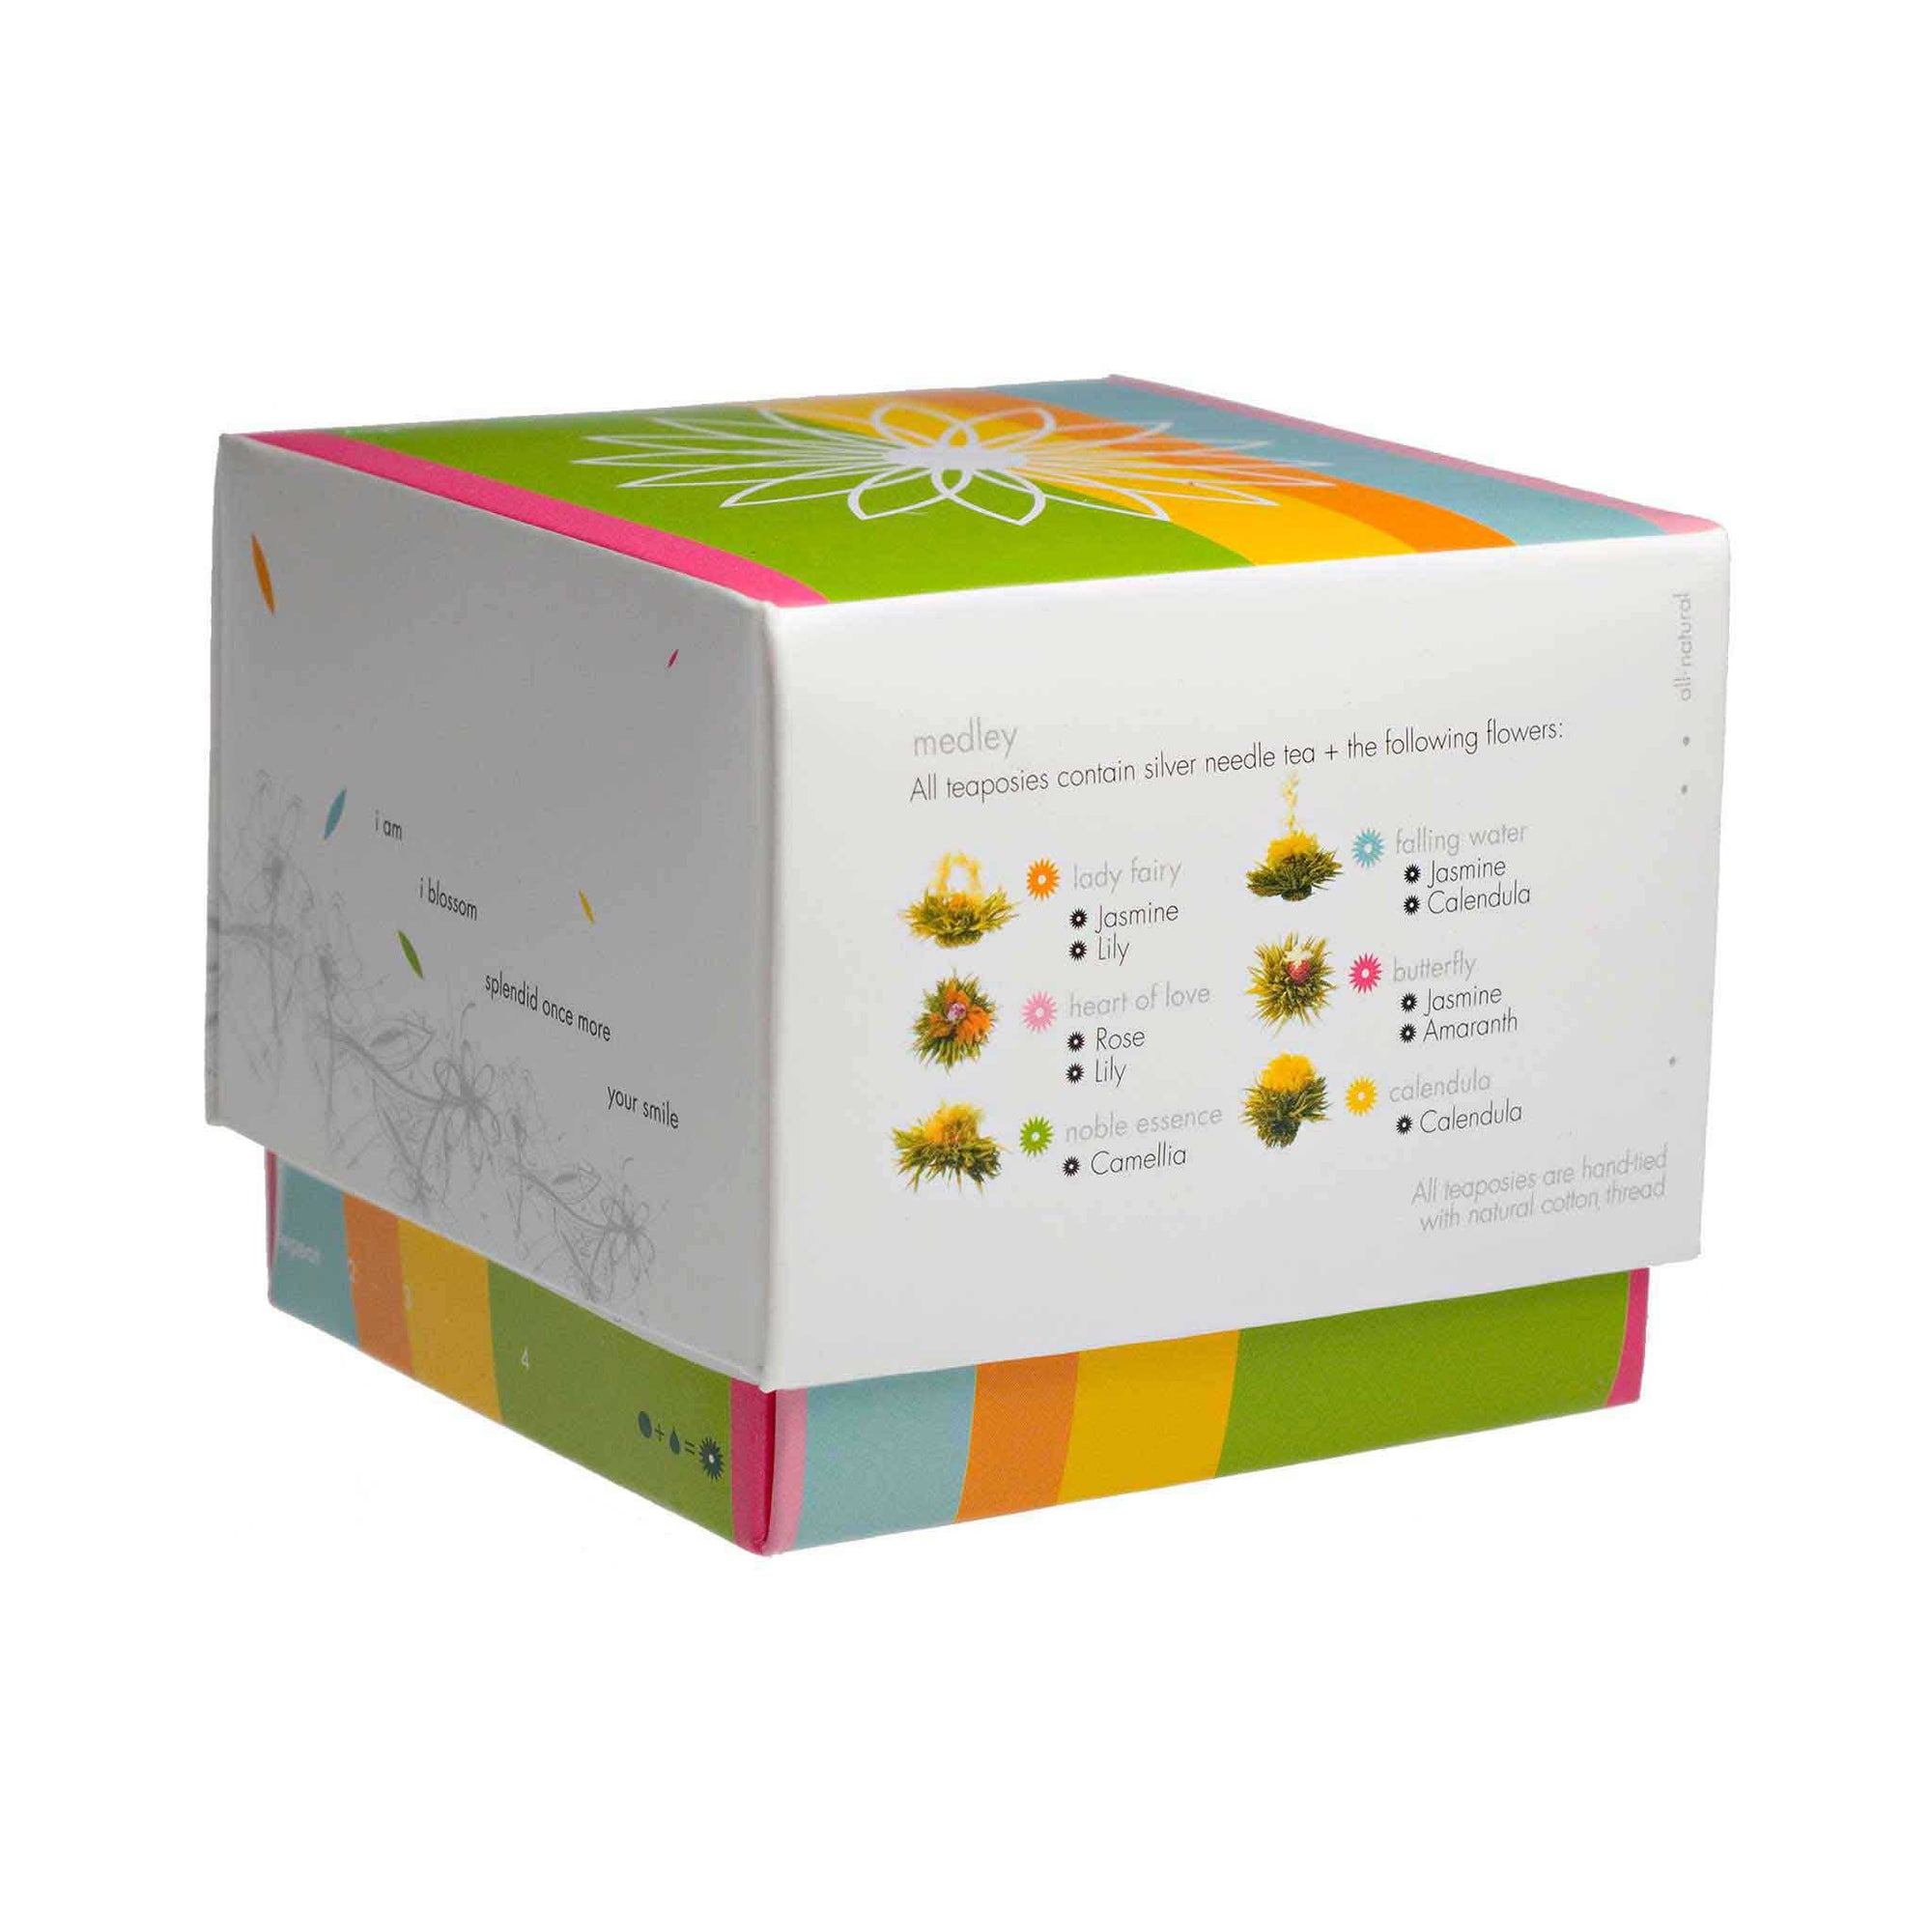 Teaposy medley blooming tea, variety of 6 silver needle white flowering teas packed in a colorful box